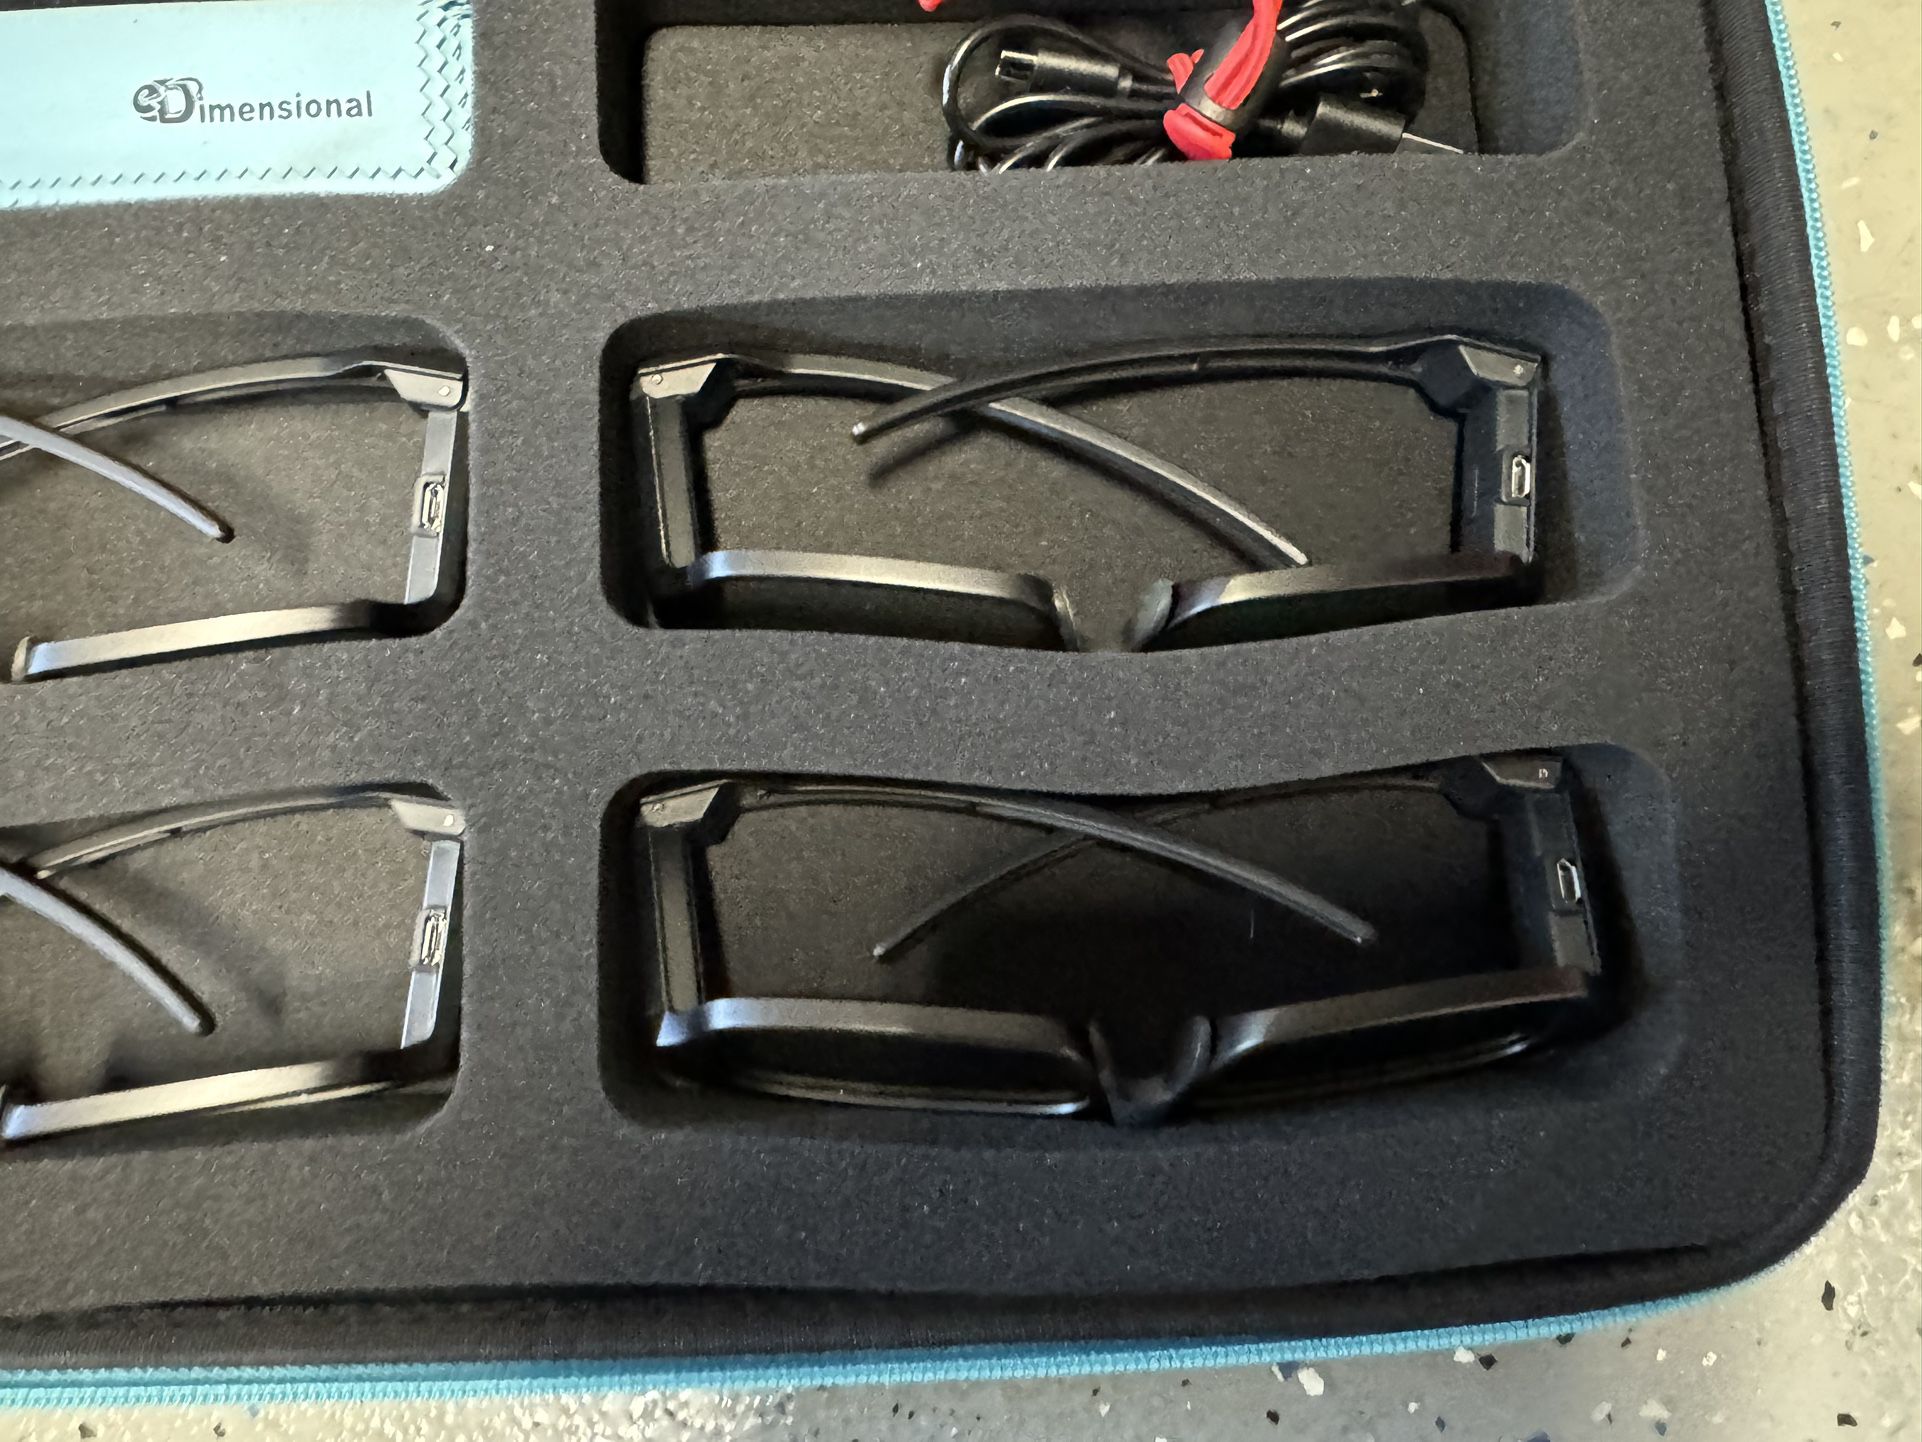 3D Glasses (4 Pairs) With Case